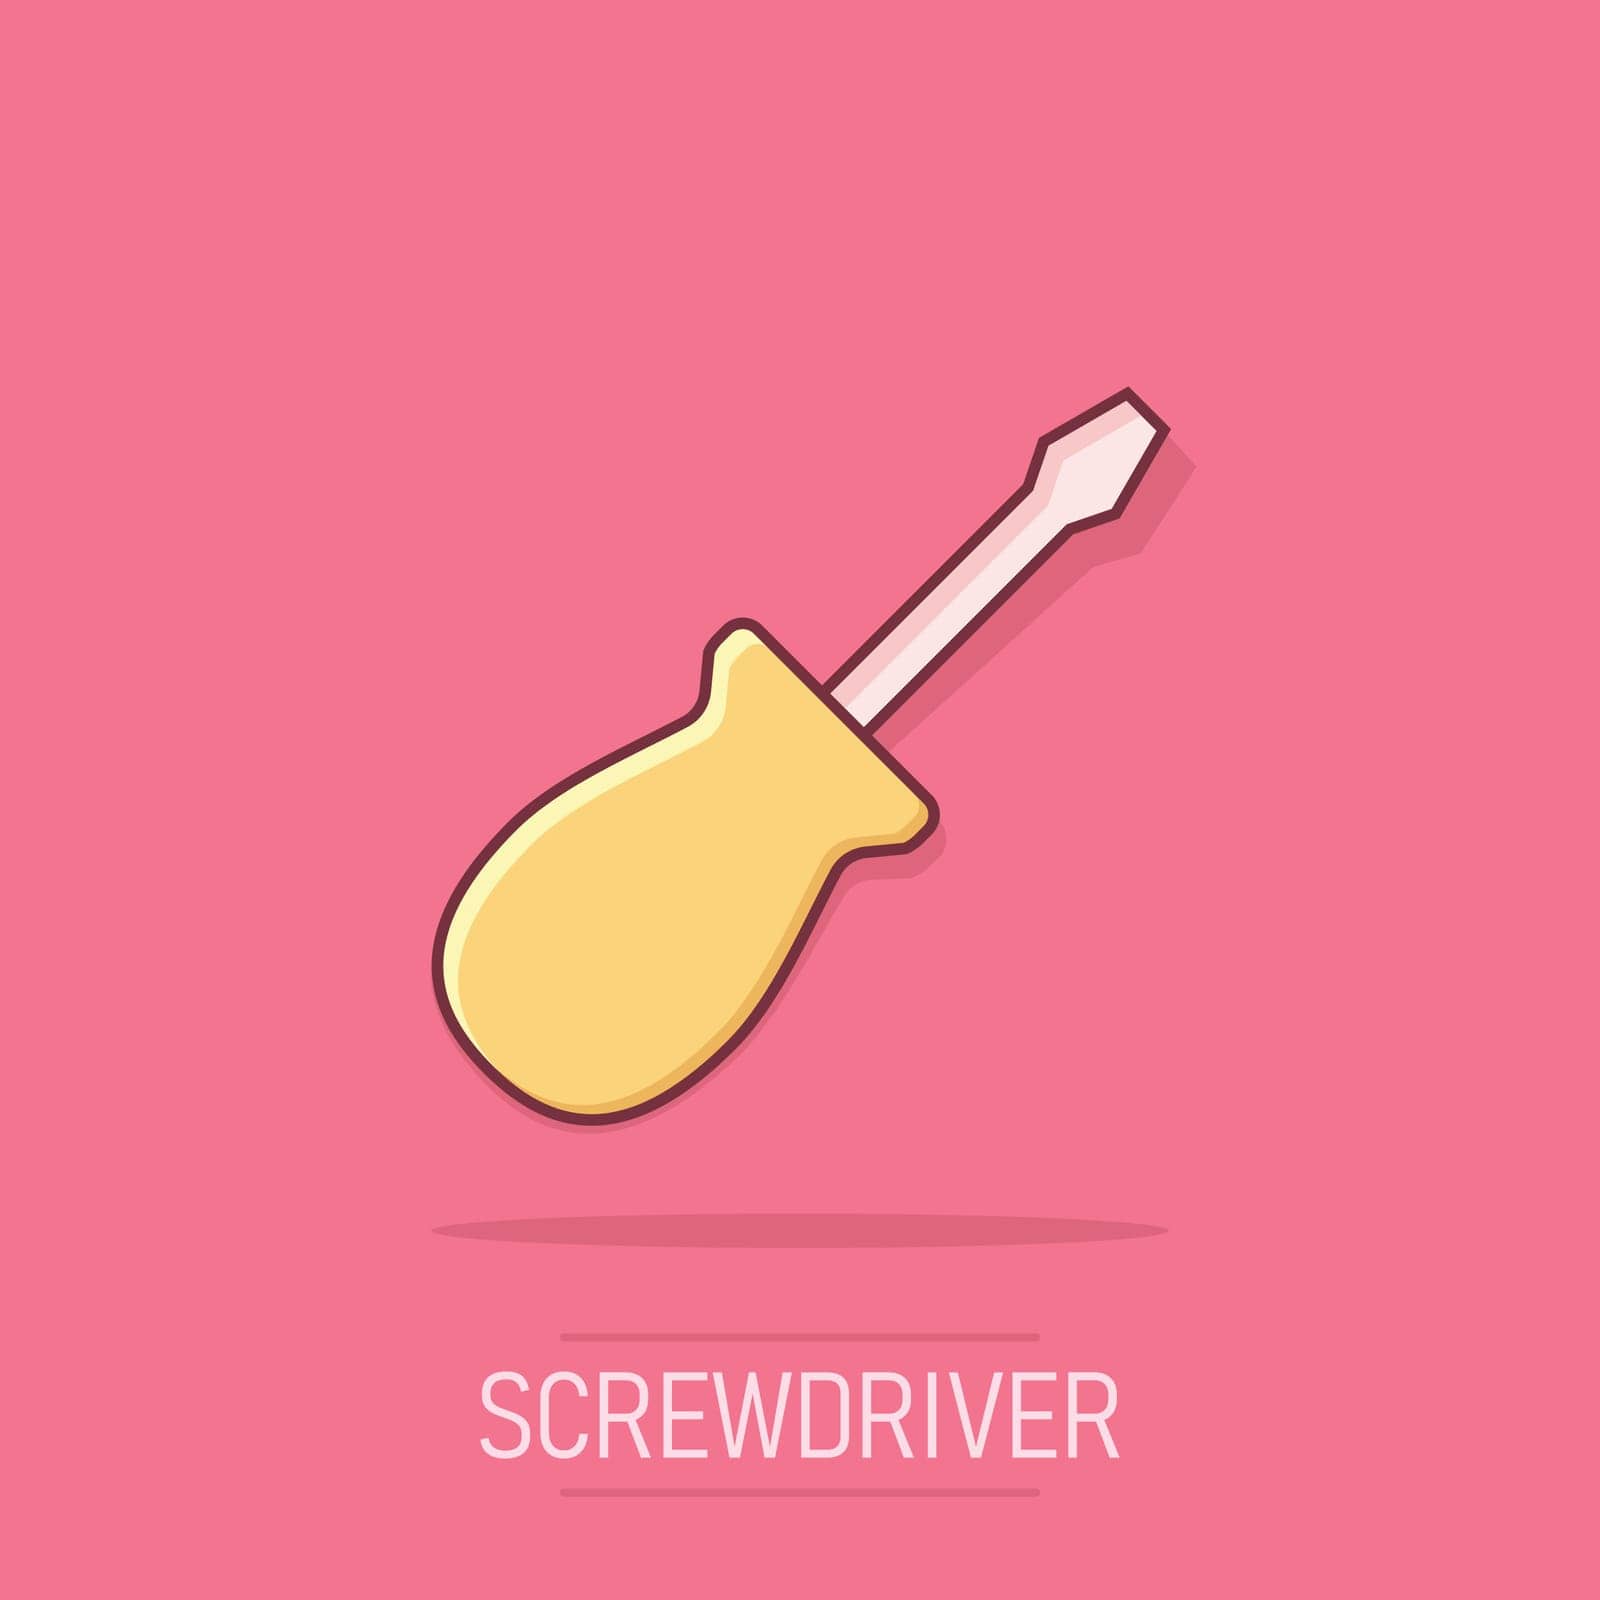 Screwdriver icon in comic style. Spanner key cartoon vector illustration on isolated background. Repair equipment splash effect business concept. by LysenkoA